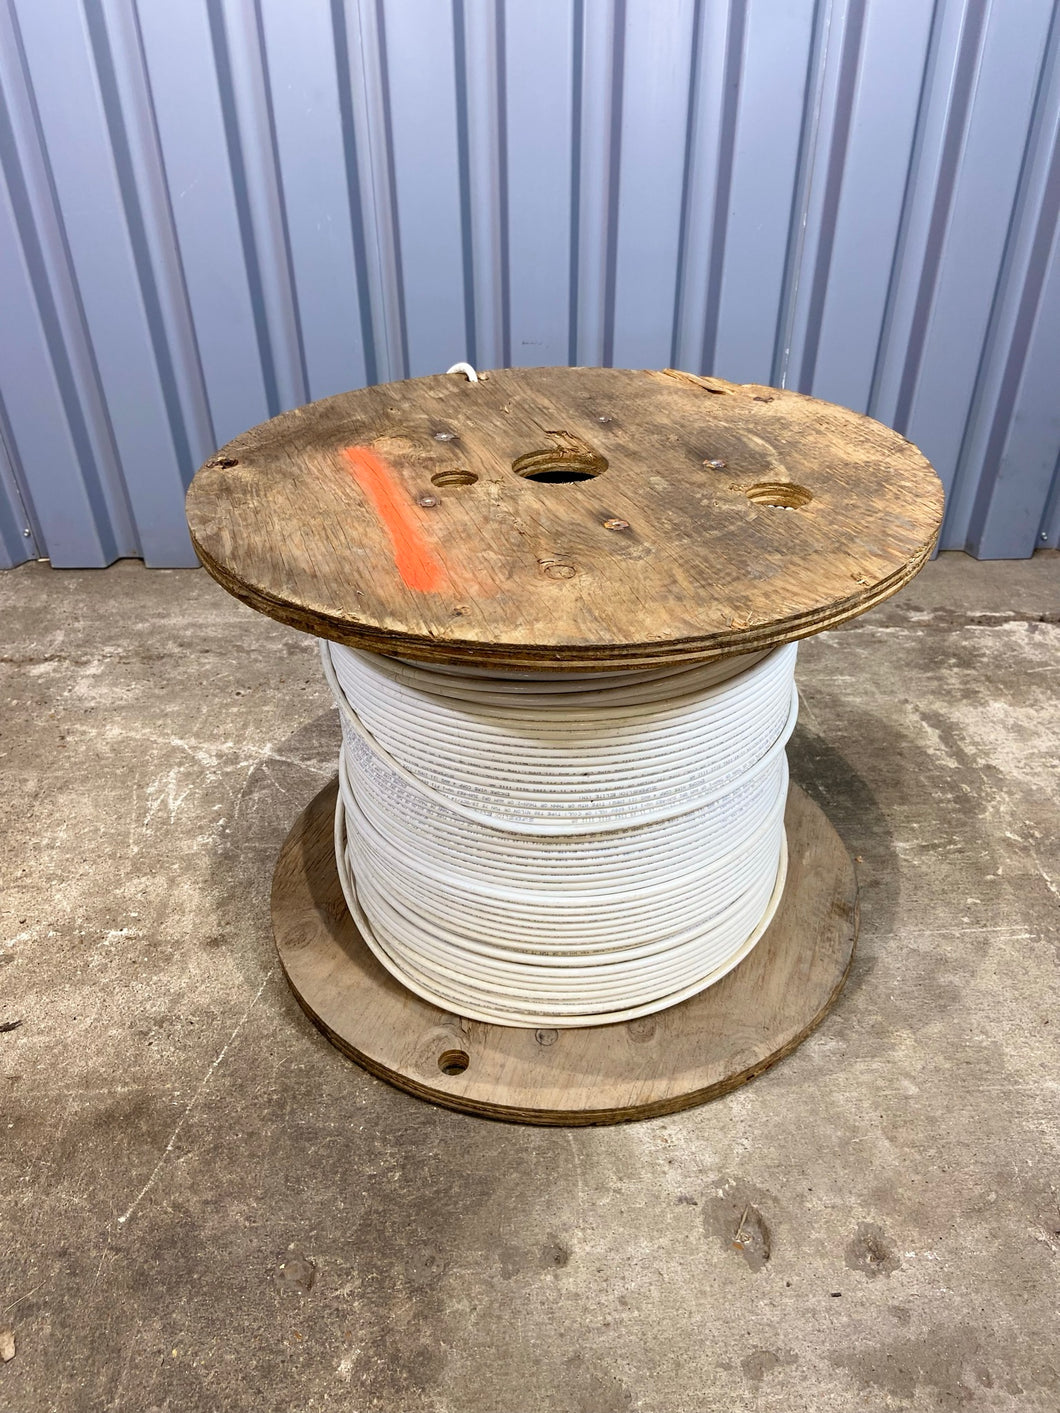 Encore Wire 4 AWG MTW/THHN/THWN-2 Electrical Wire, 1490ft, 600V, *Lot of (1) 1490ft Spool* (Open Box)